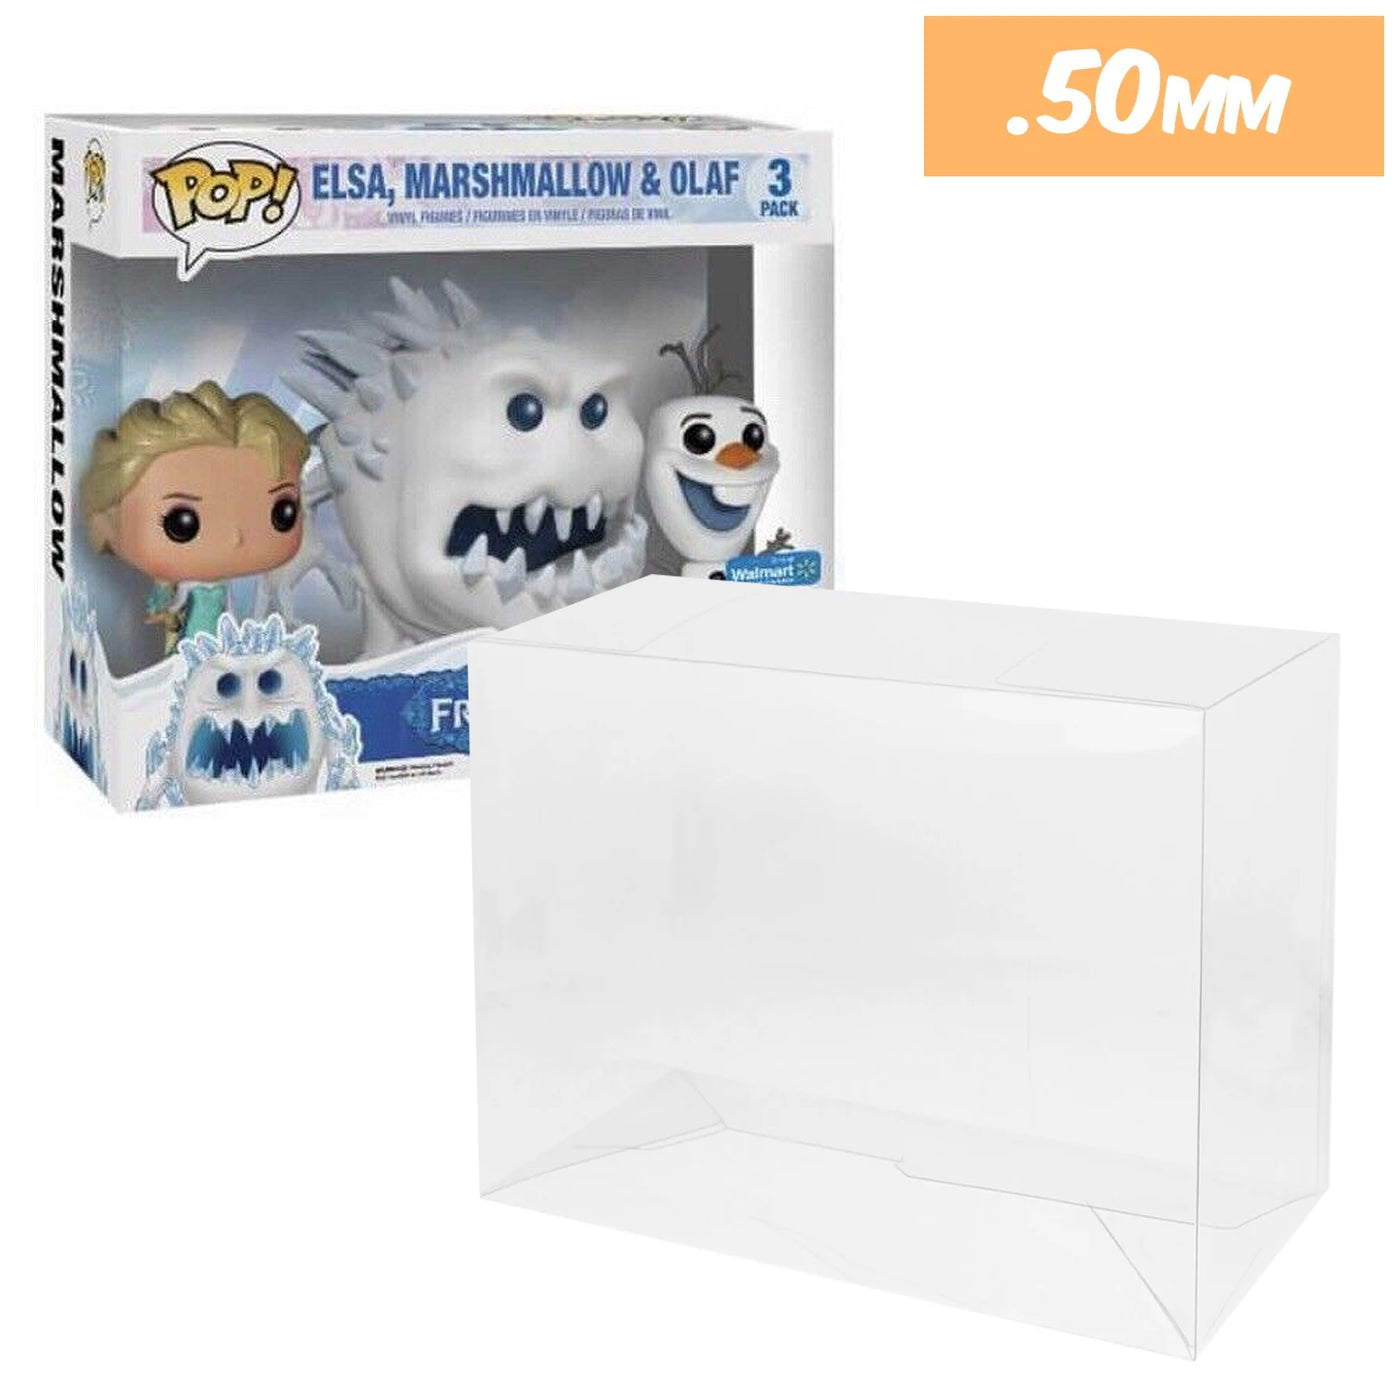 frozen elsa marshmallow olaf 3 pack best funko pop protectors thick strong uv scratch flat top stack vinyl display geek plastic shield vaulted eco armor fits collect protect display case kollector protector